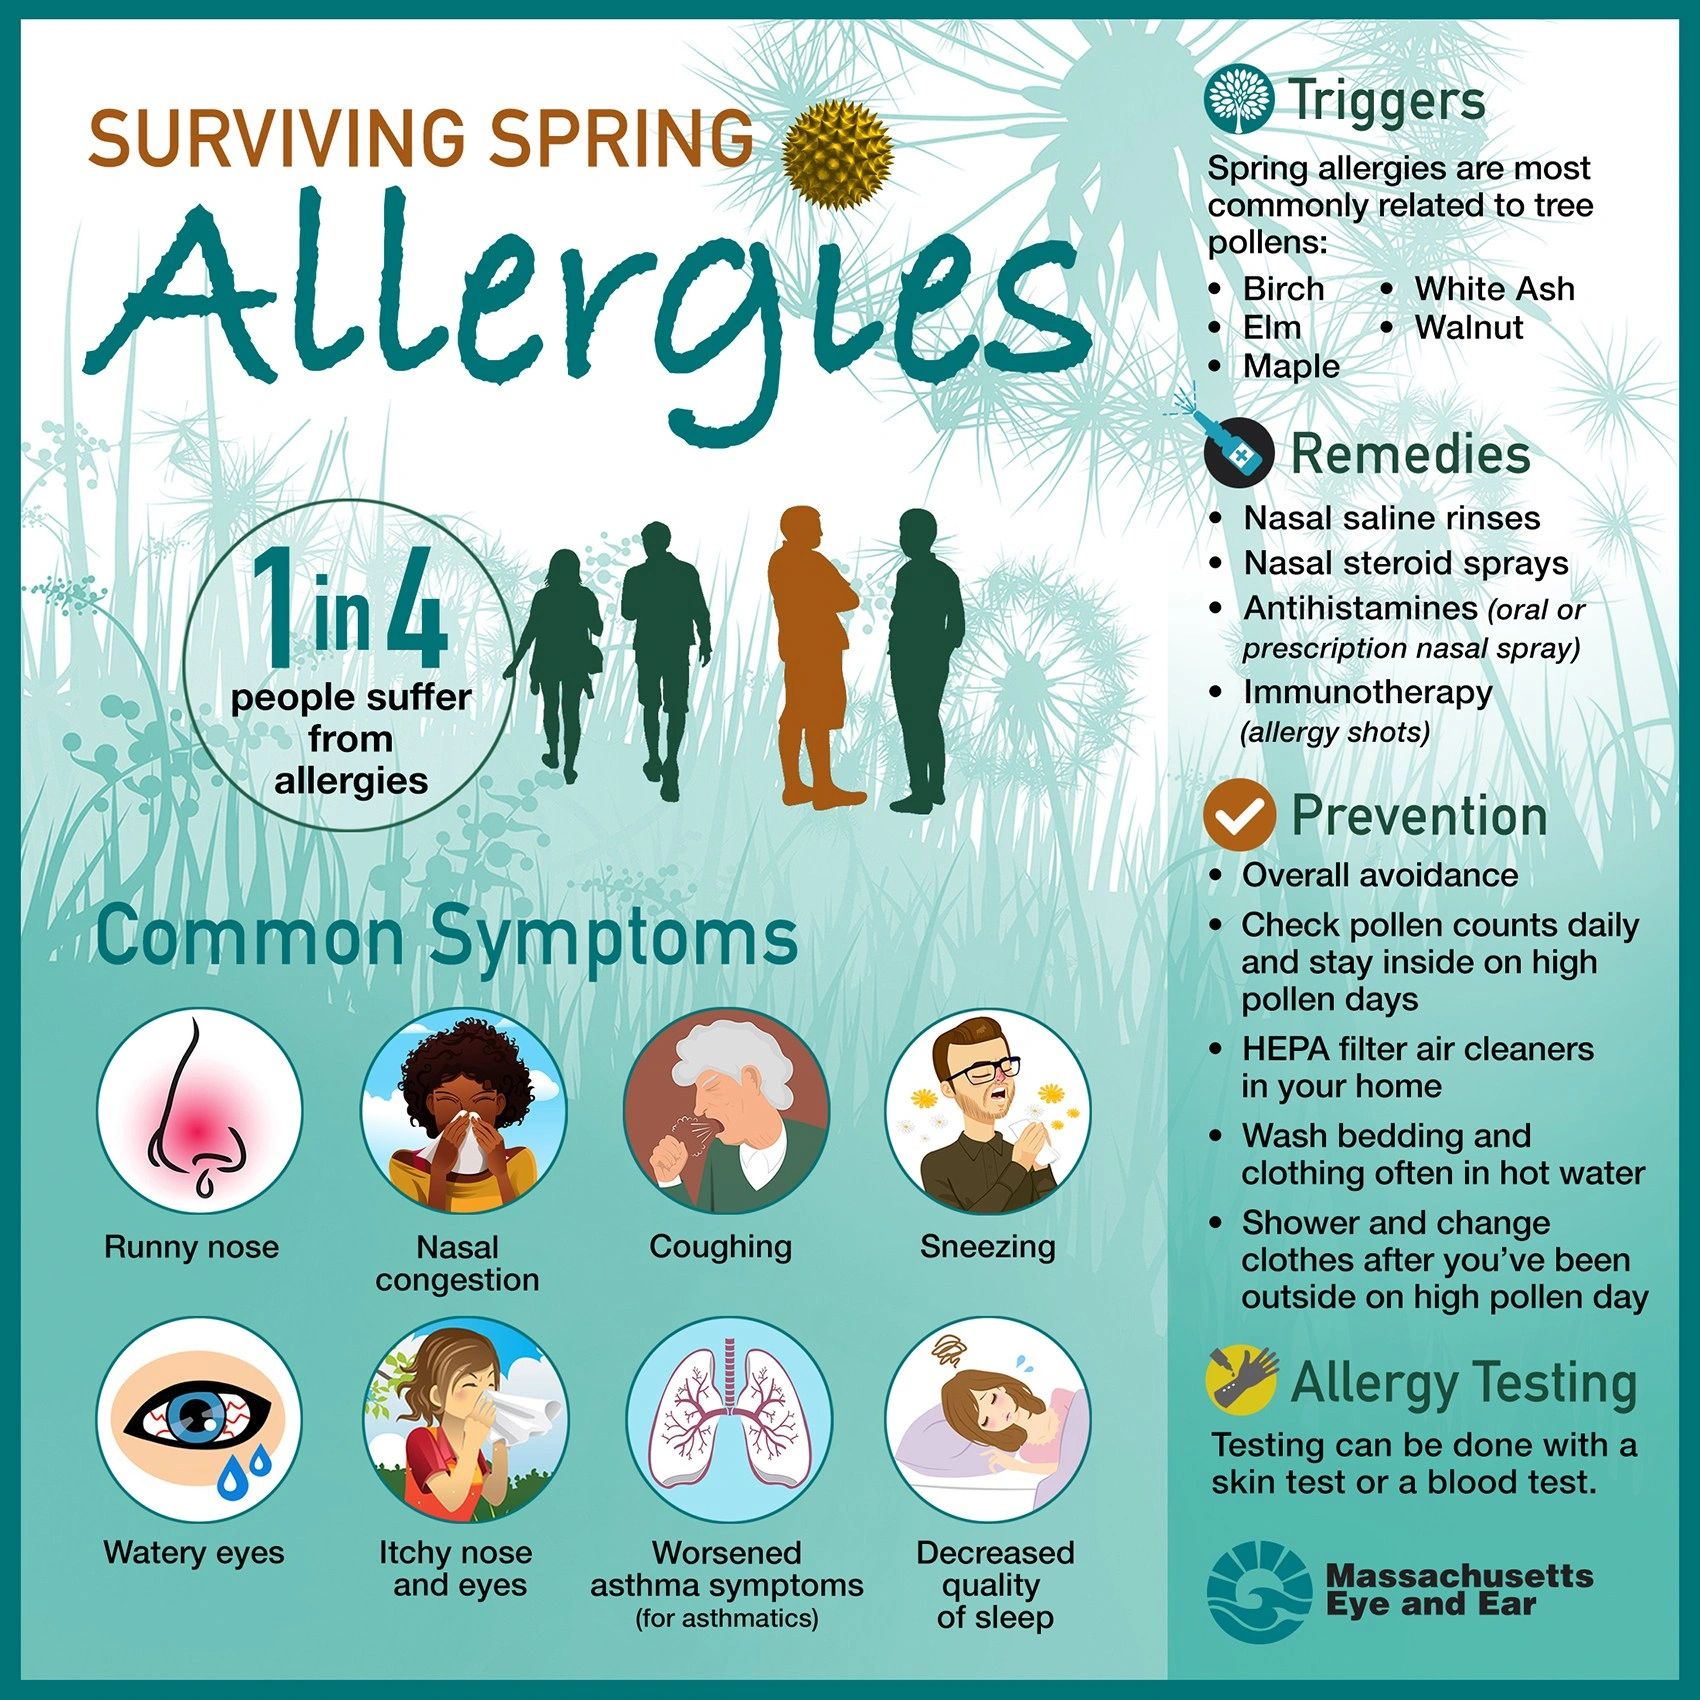 Spring allergies got you down? We can help!! Use these tips